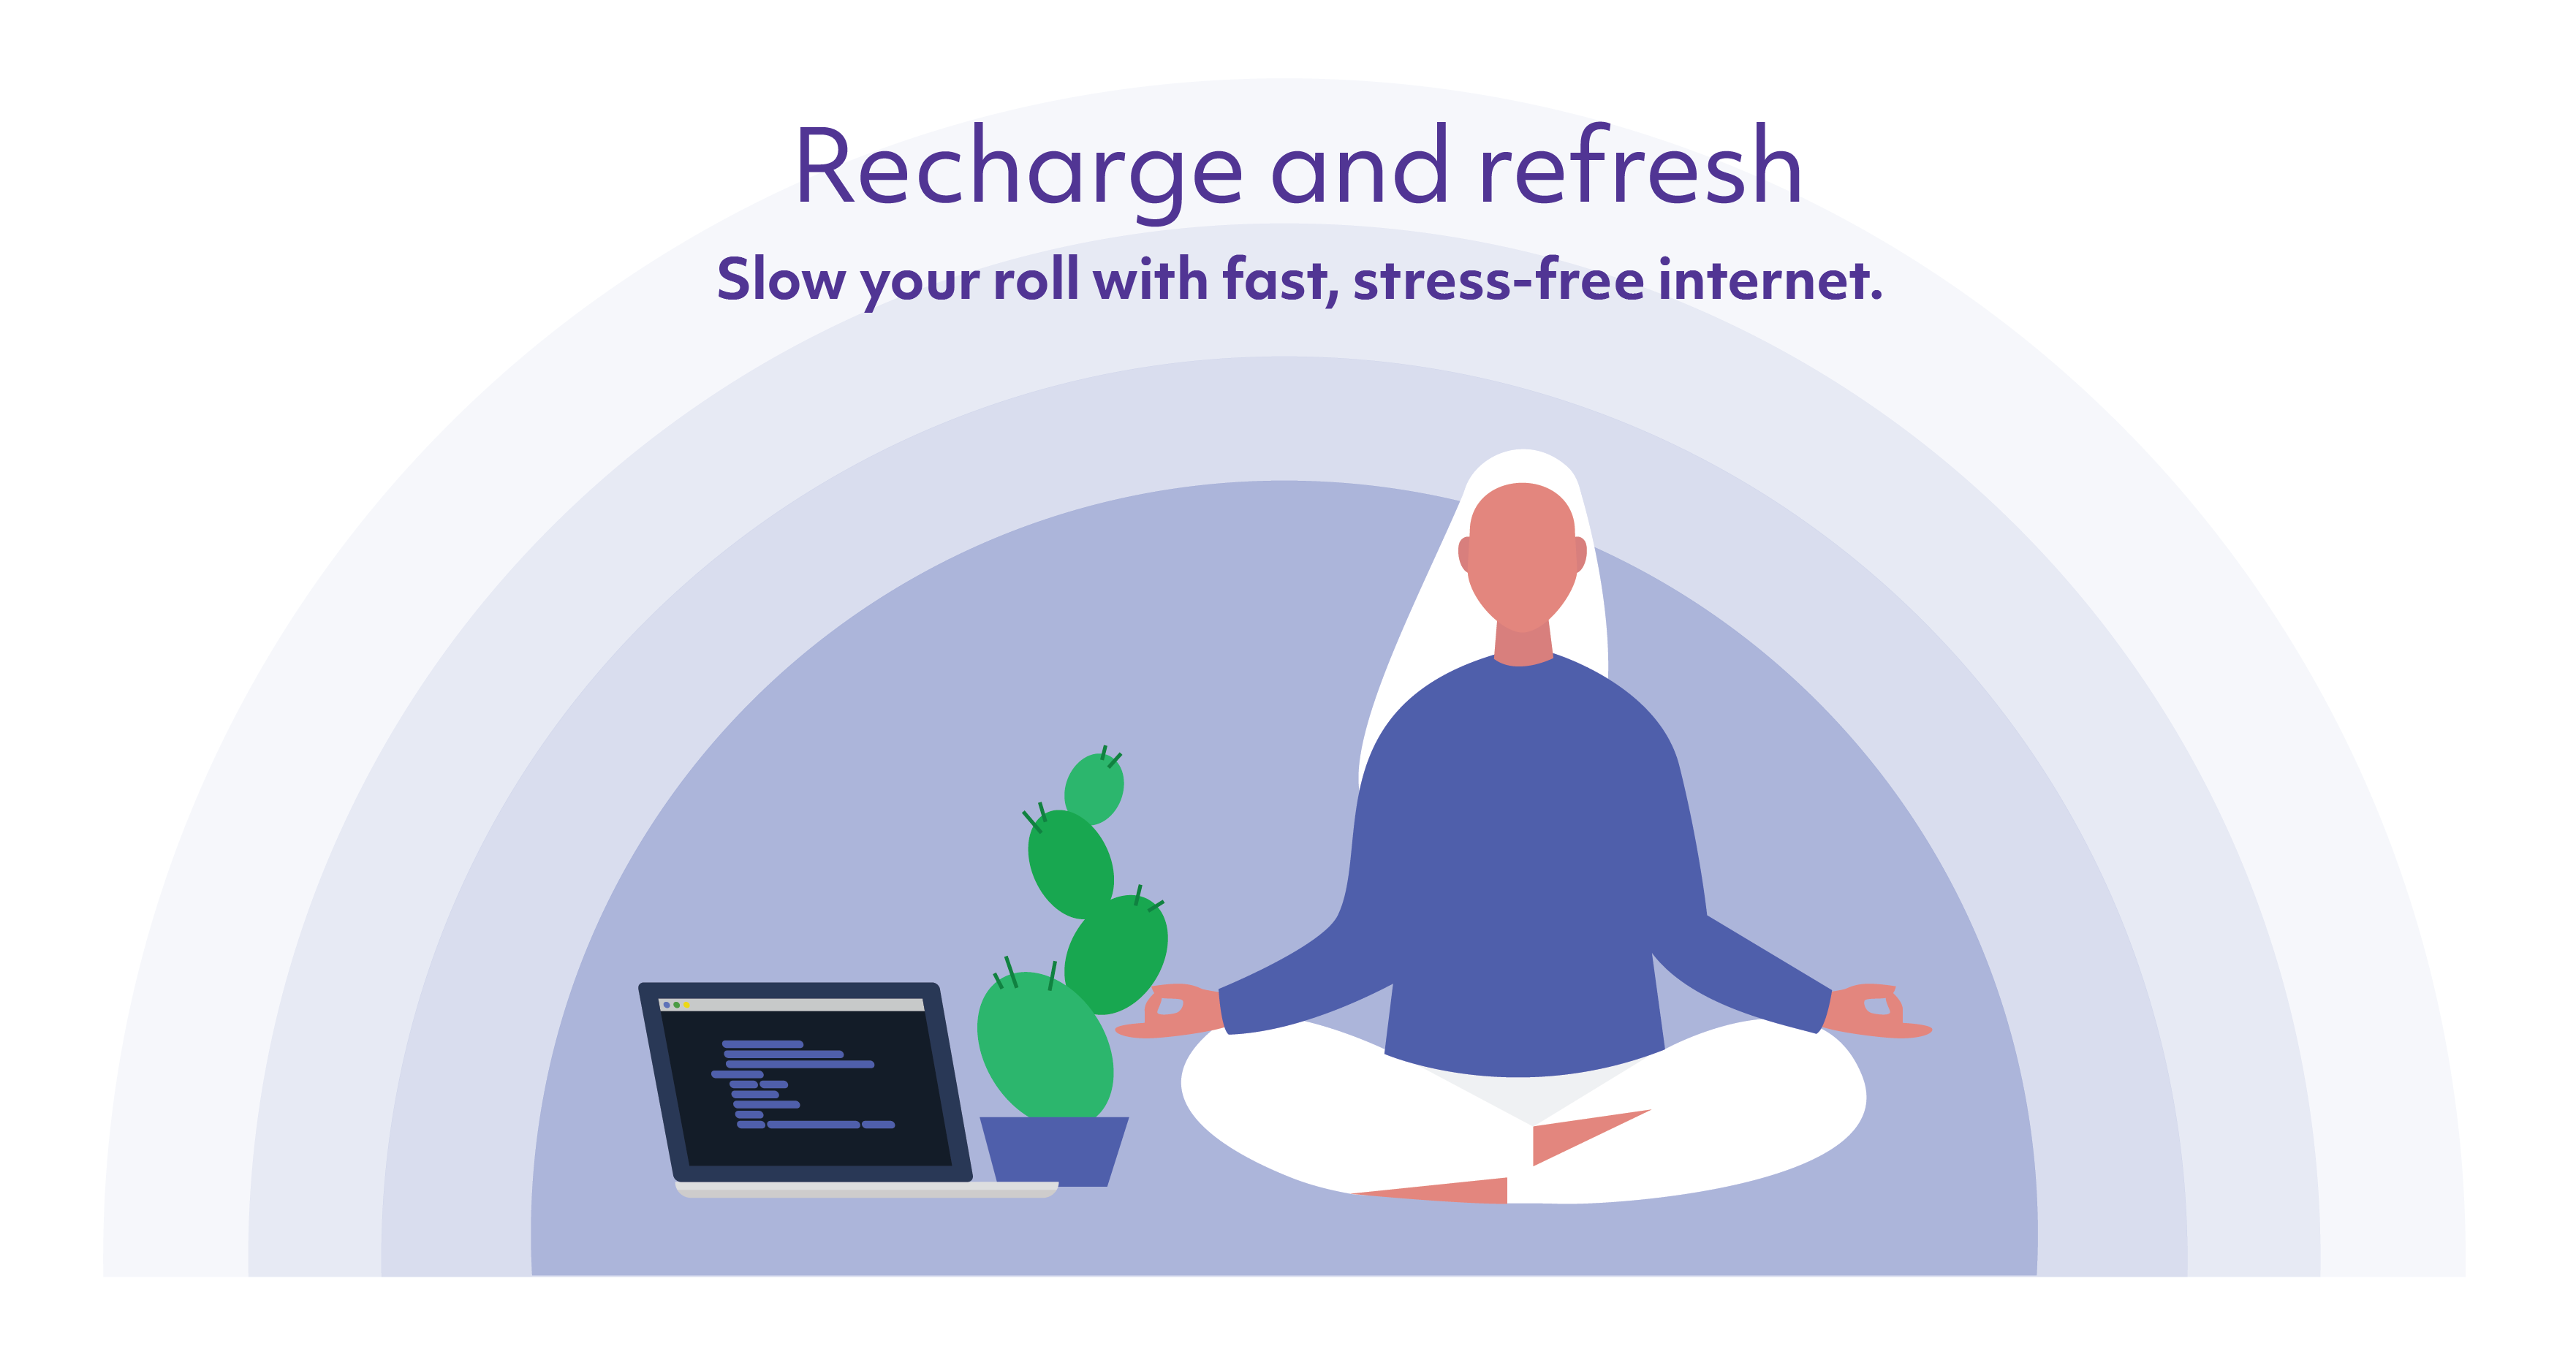 Recharge and refresh. Slow your roll with fast, stress-free internet